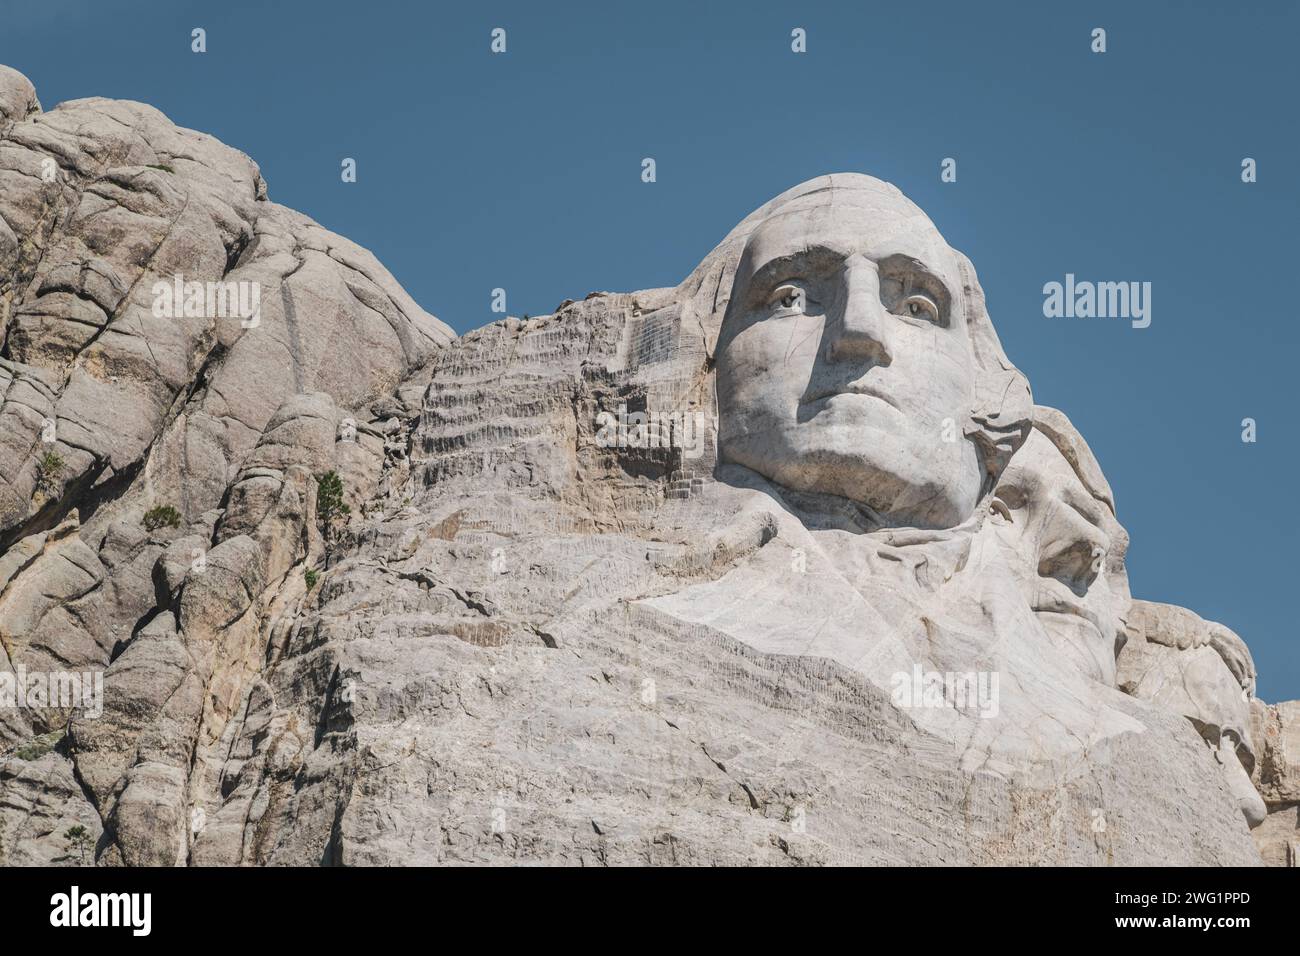 Close-up view of George Washington carved into the mountainside at Mt. Rushmore Stock Photo